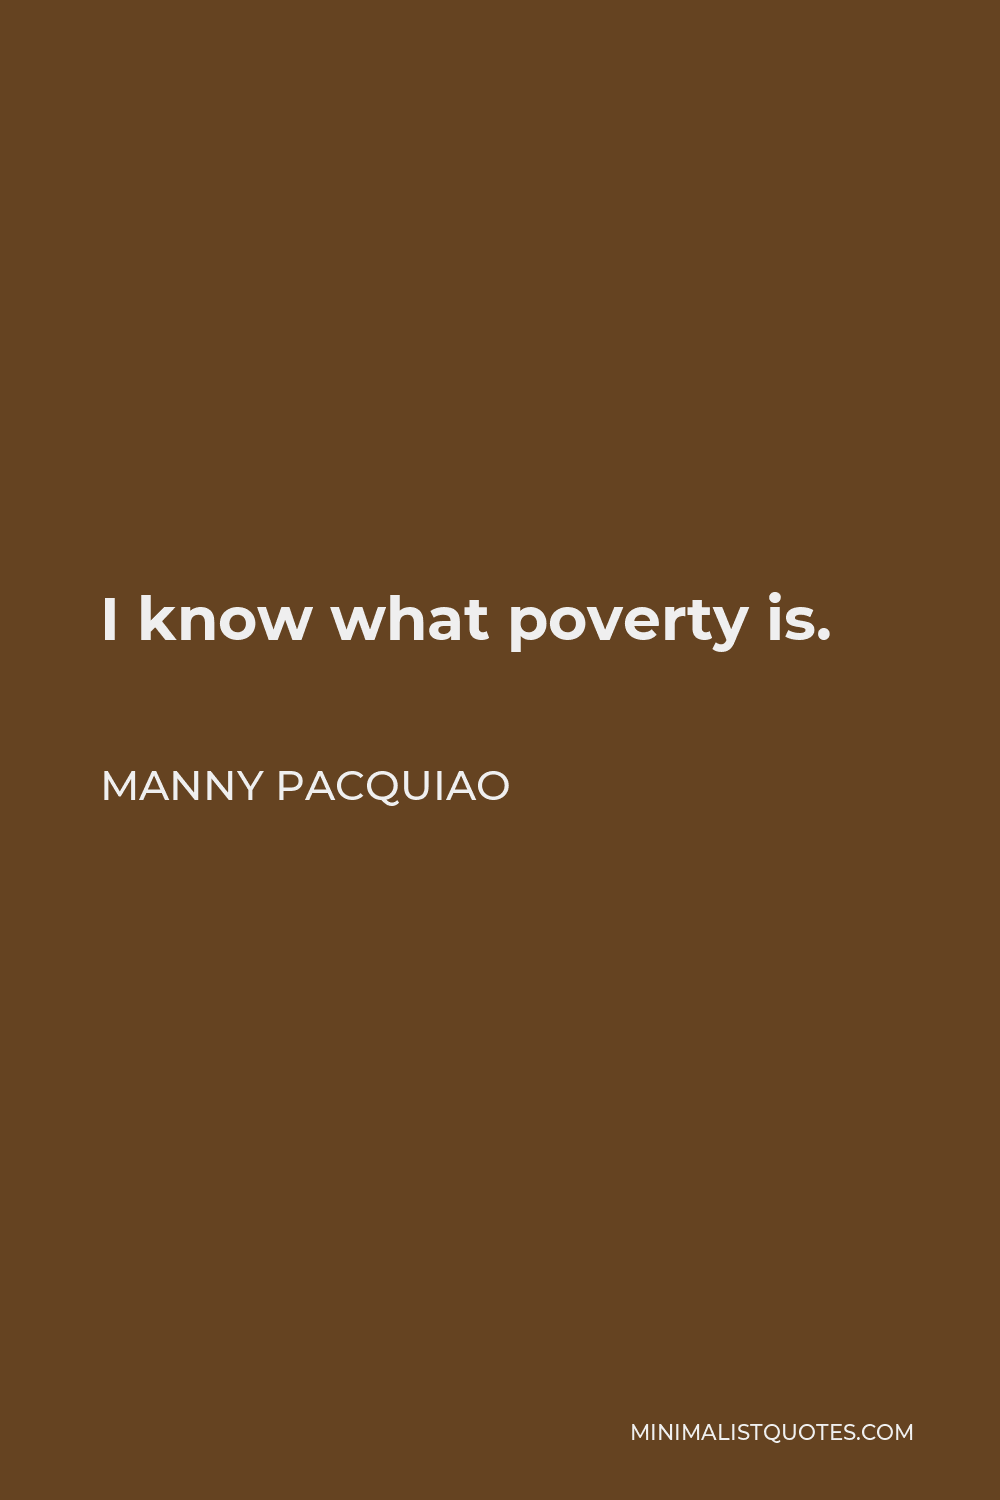 Manny Pacquiao Quote - I know what poverty is.